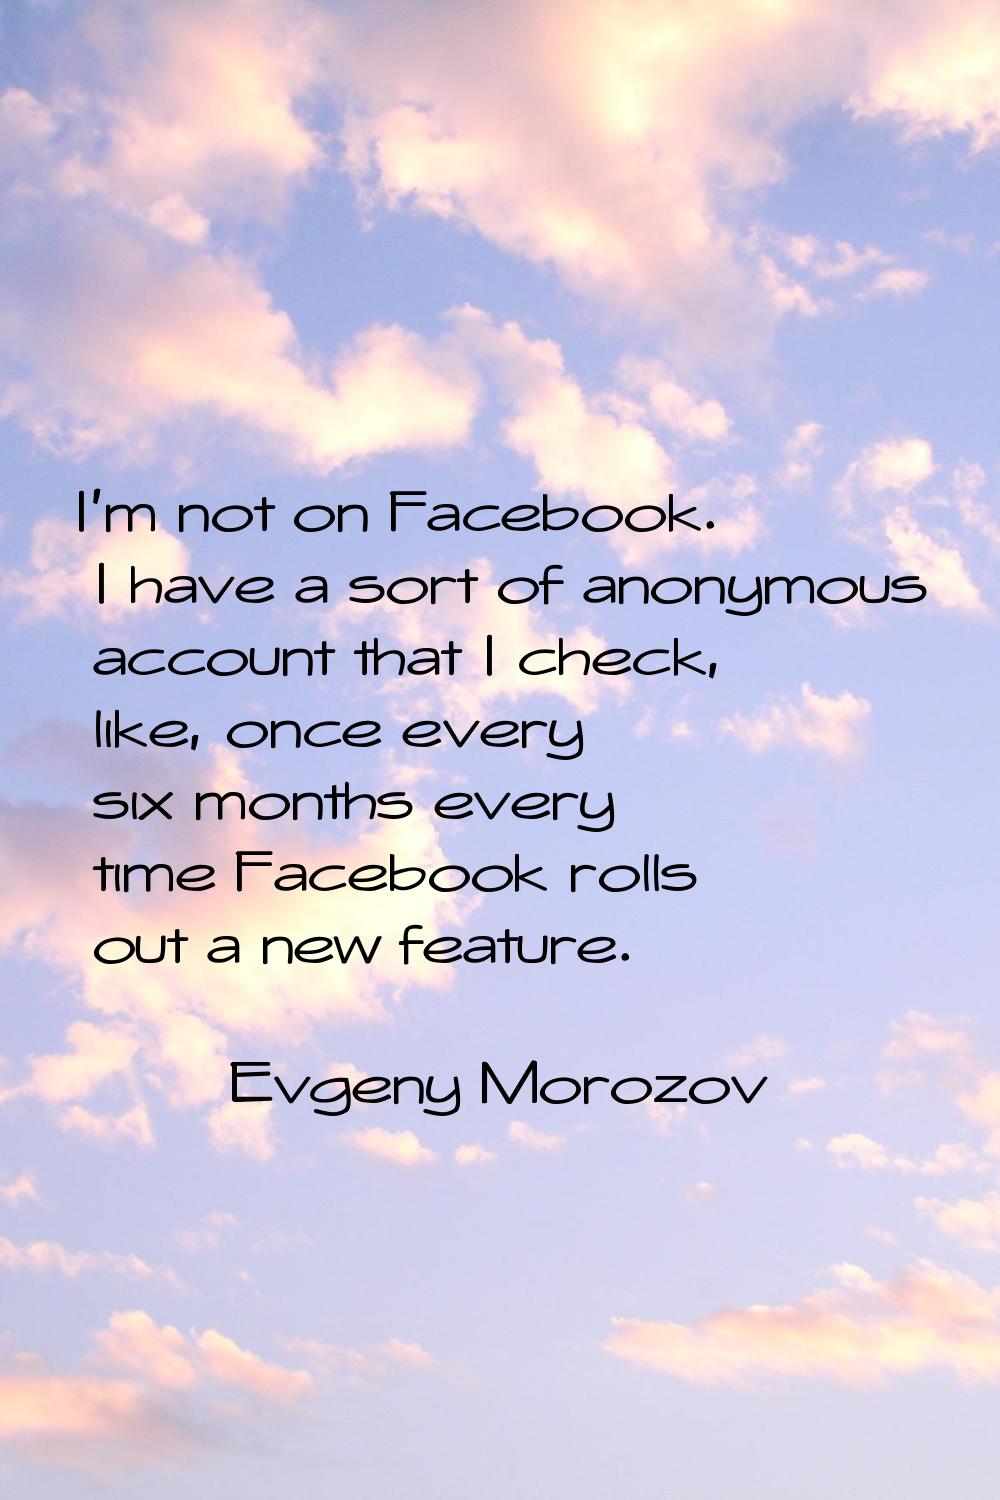 I'm not on Facebook. I have a sort of anonymous account that I check, like, once every six months e